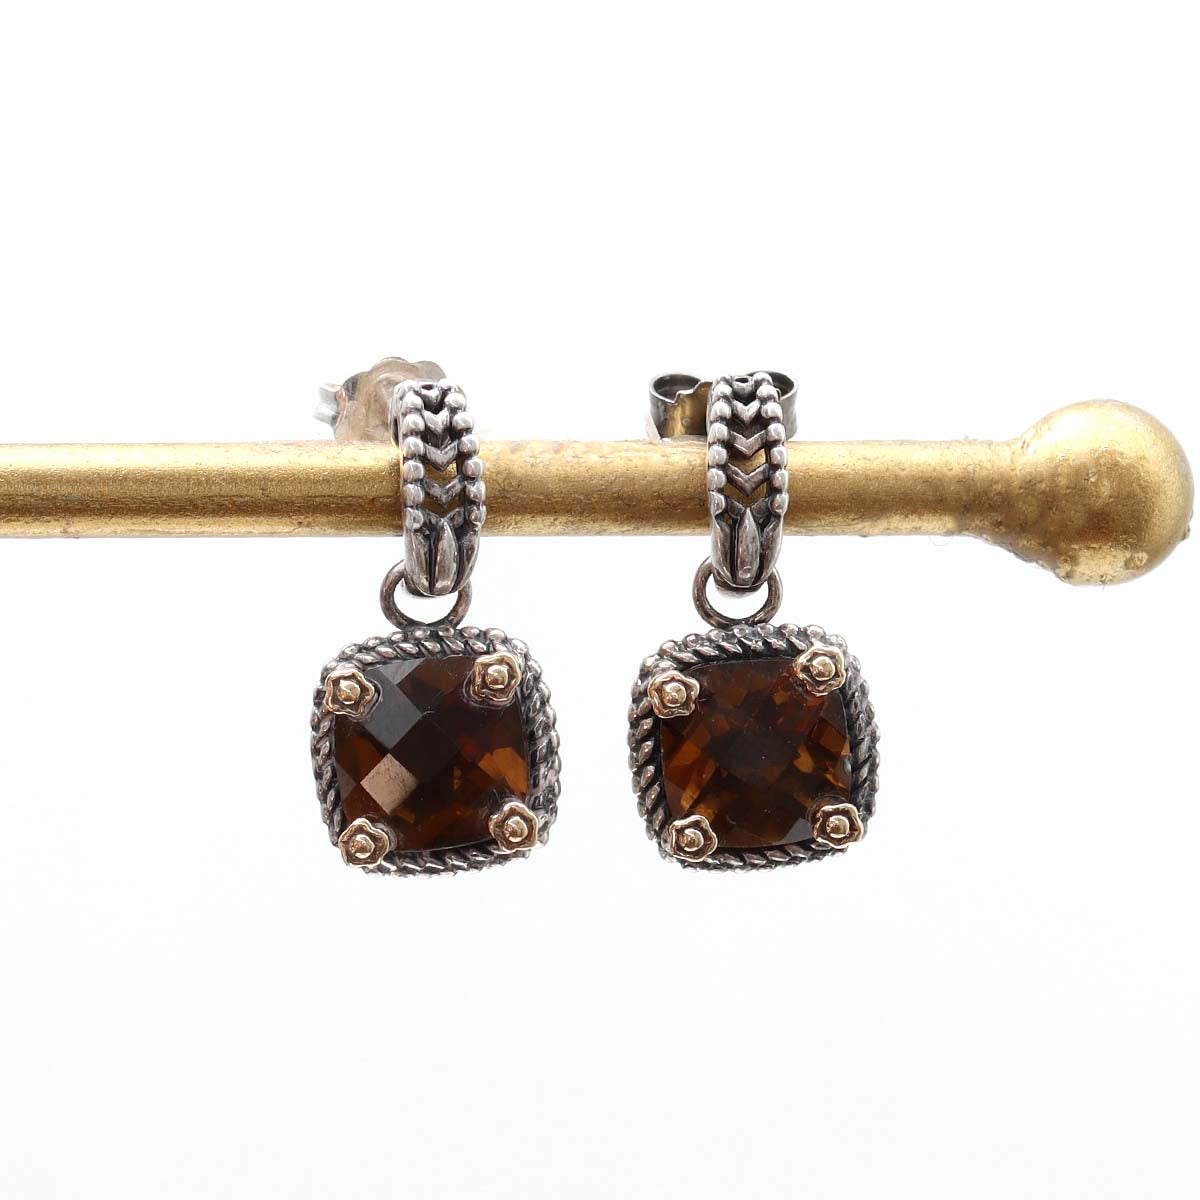 Vintage Inspired Yellow Topaz and Sterling Silver Drop Earrings  #8009E-YT